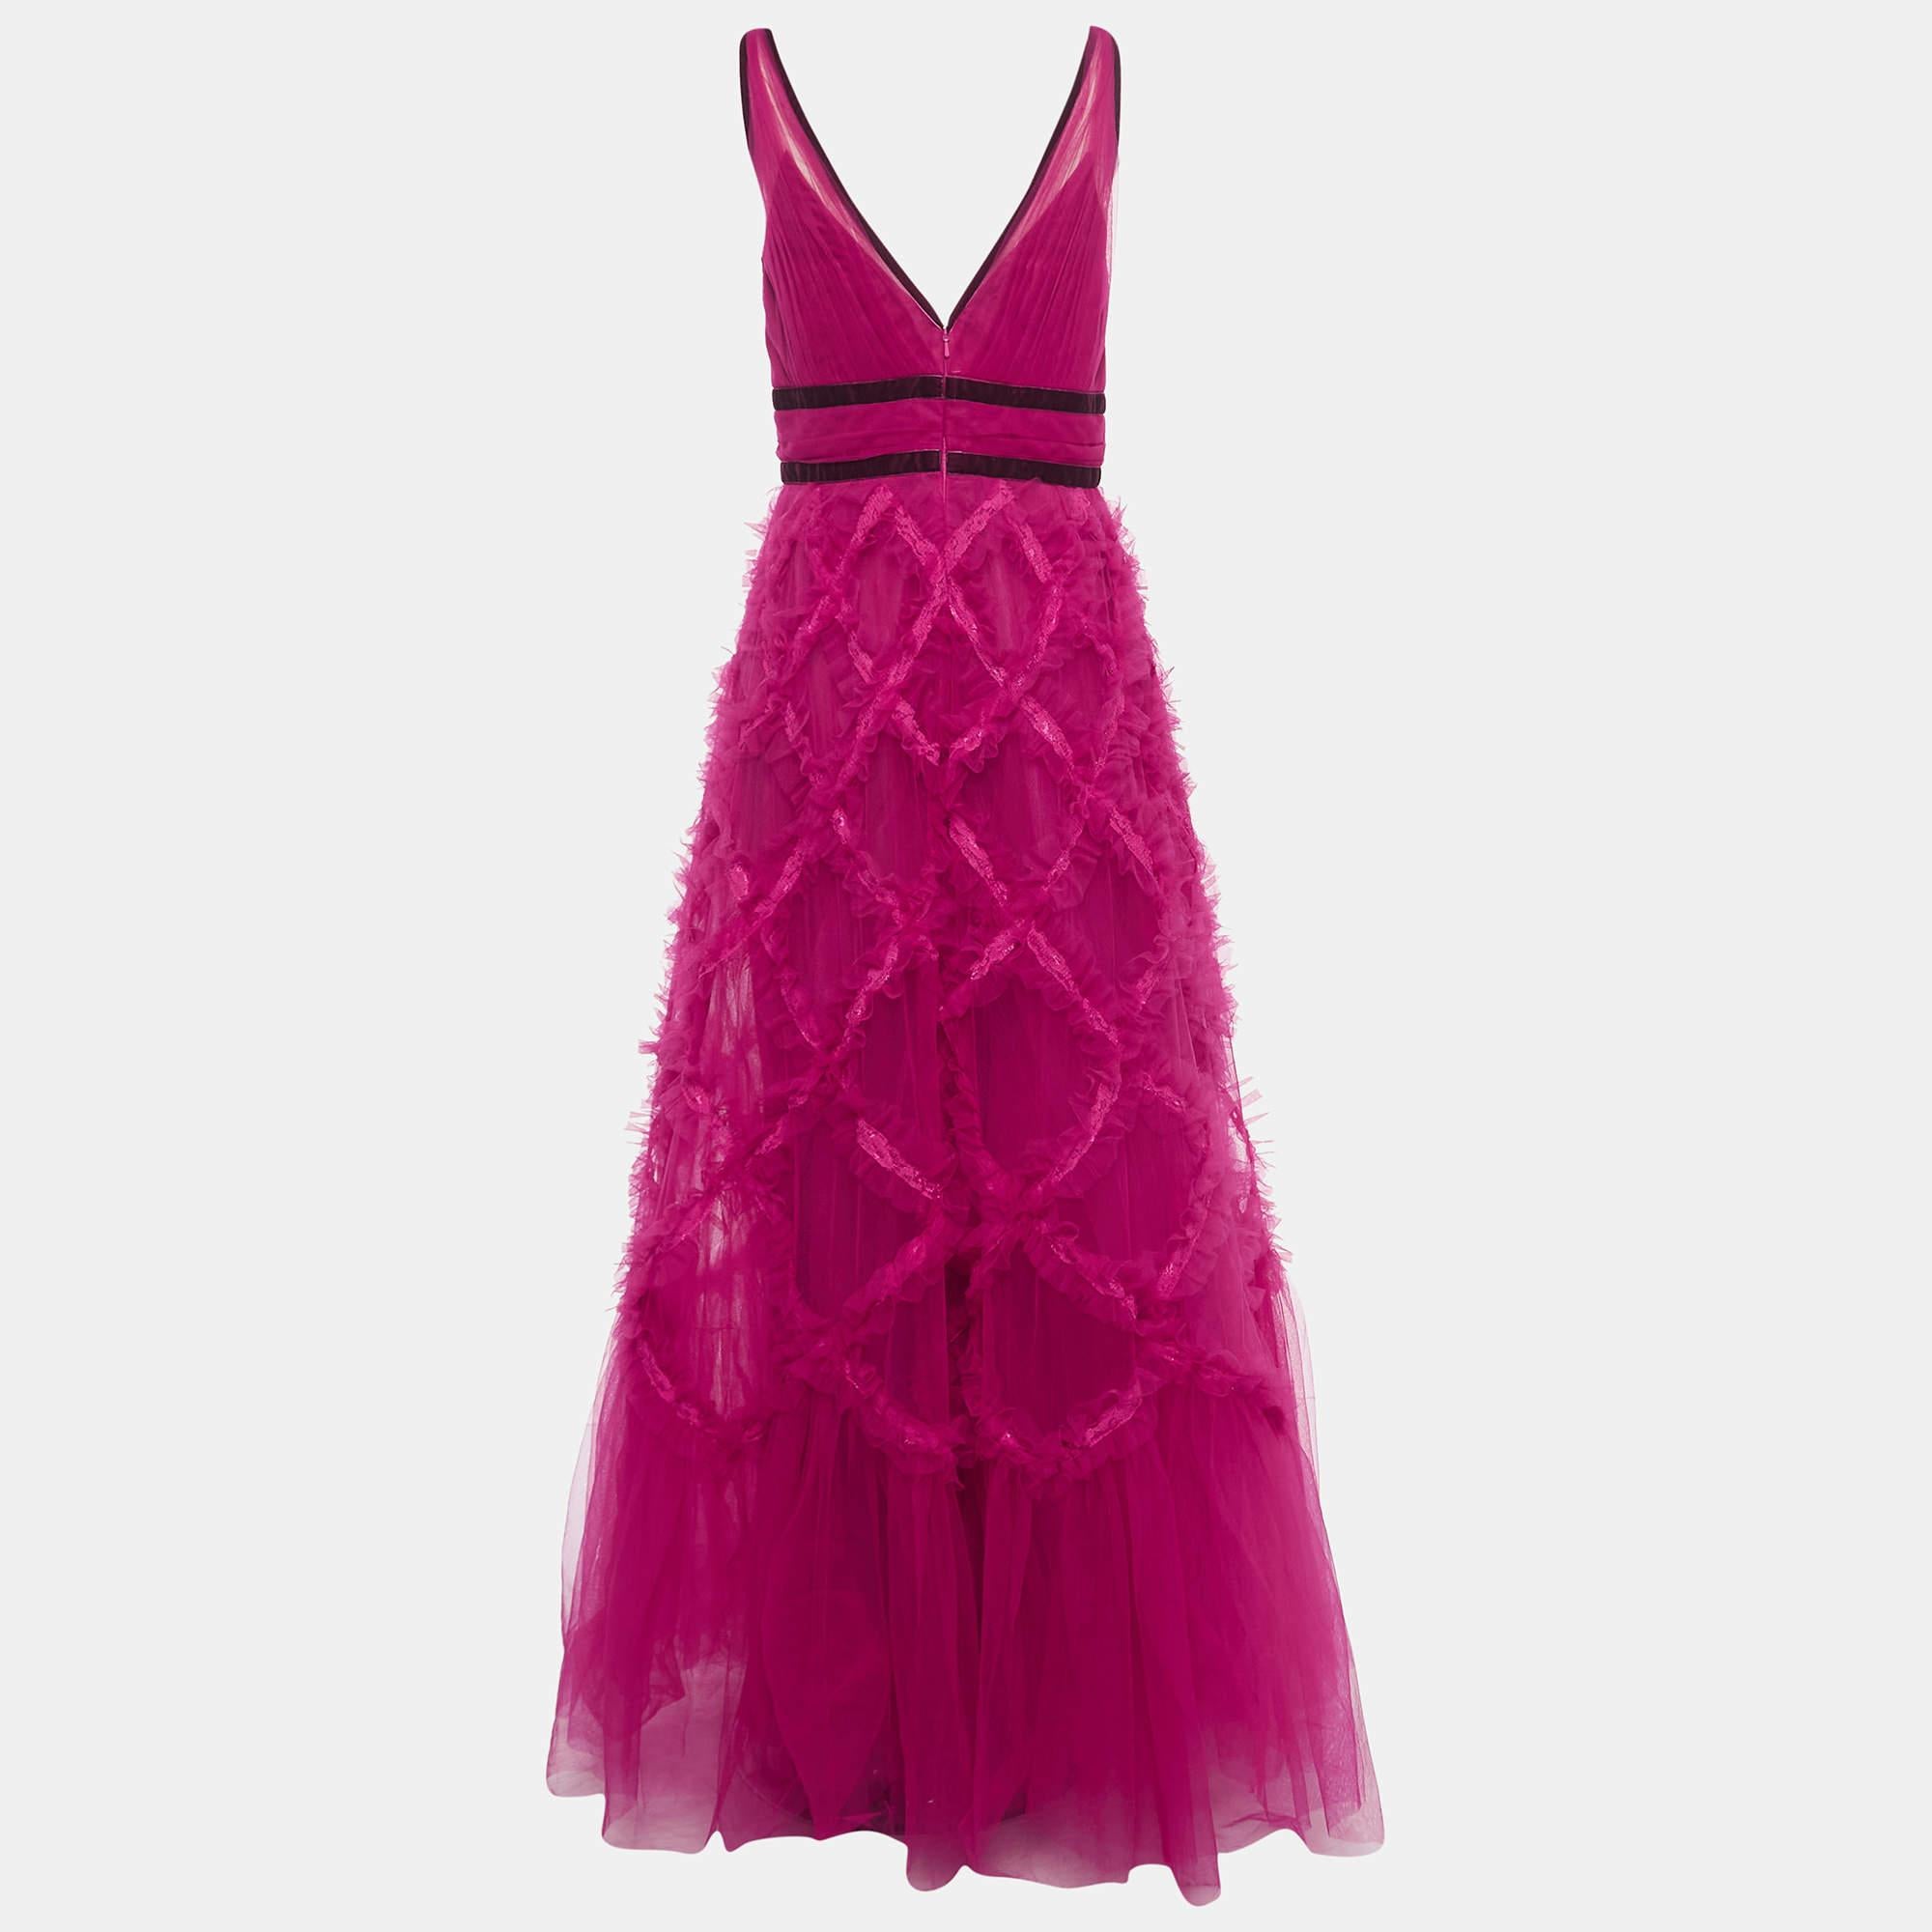 Dress up in this designer gown and deliver a sophisticated look every time. Crafted from quality materials, it comes in a pretty shade of pink. The gorgeous gown has ruffle details and a zip closure. It will match well with open-toe heels and dainty